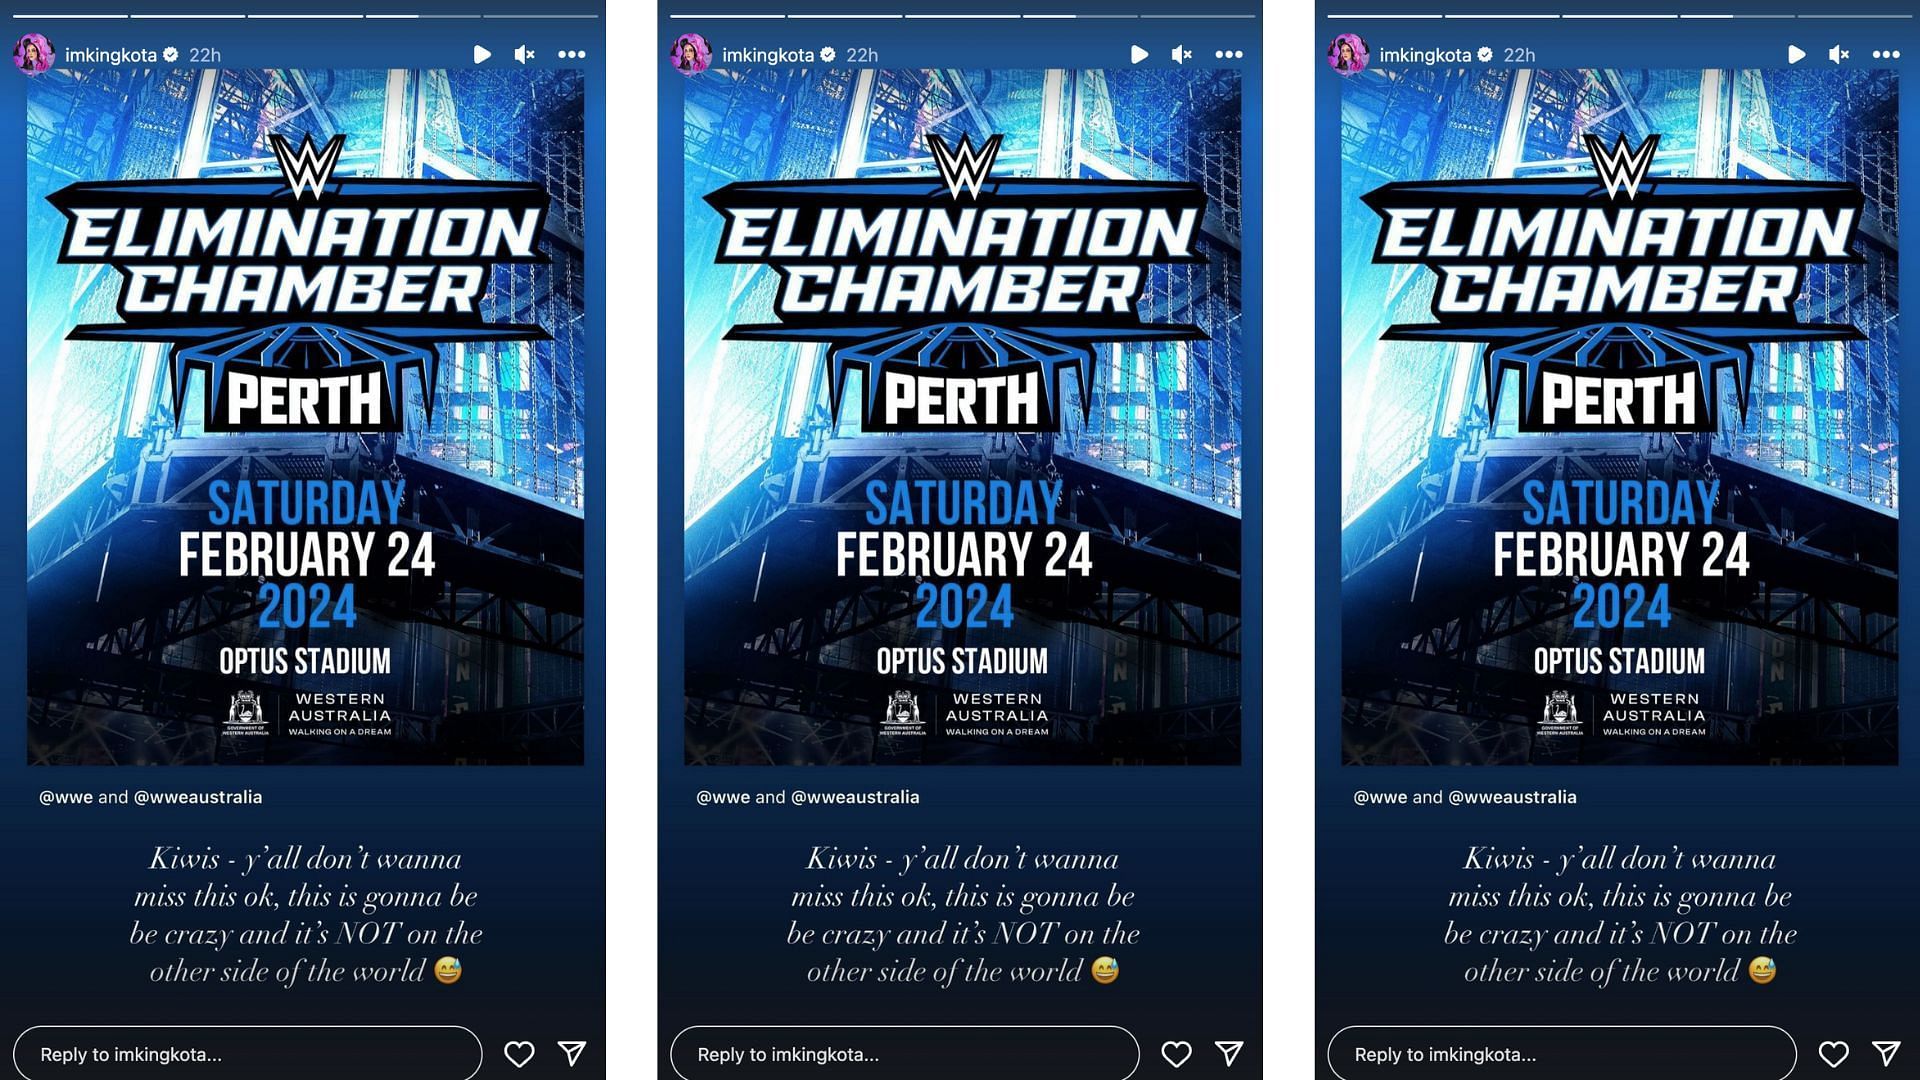 Elimination Chamber will air in Australia next year.